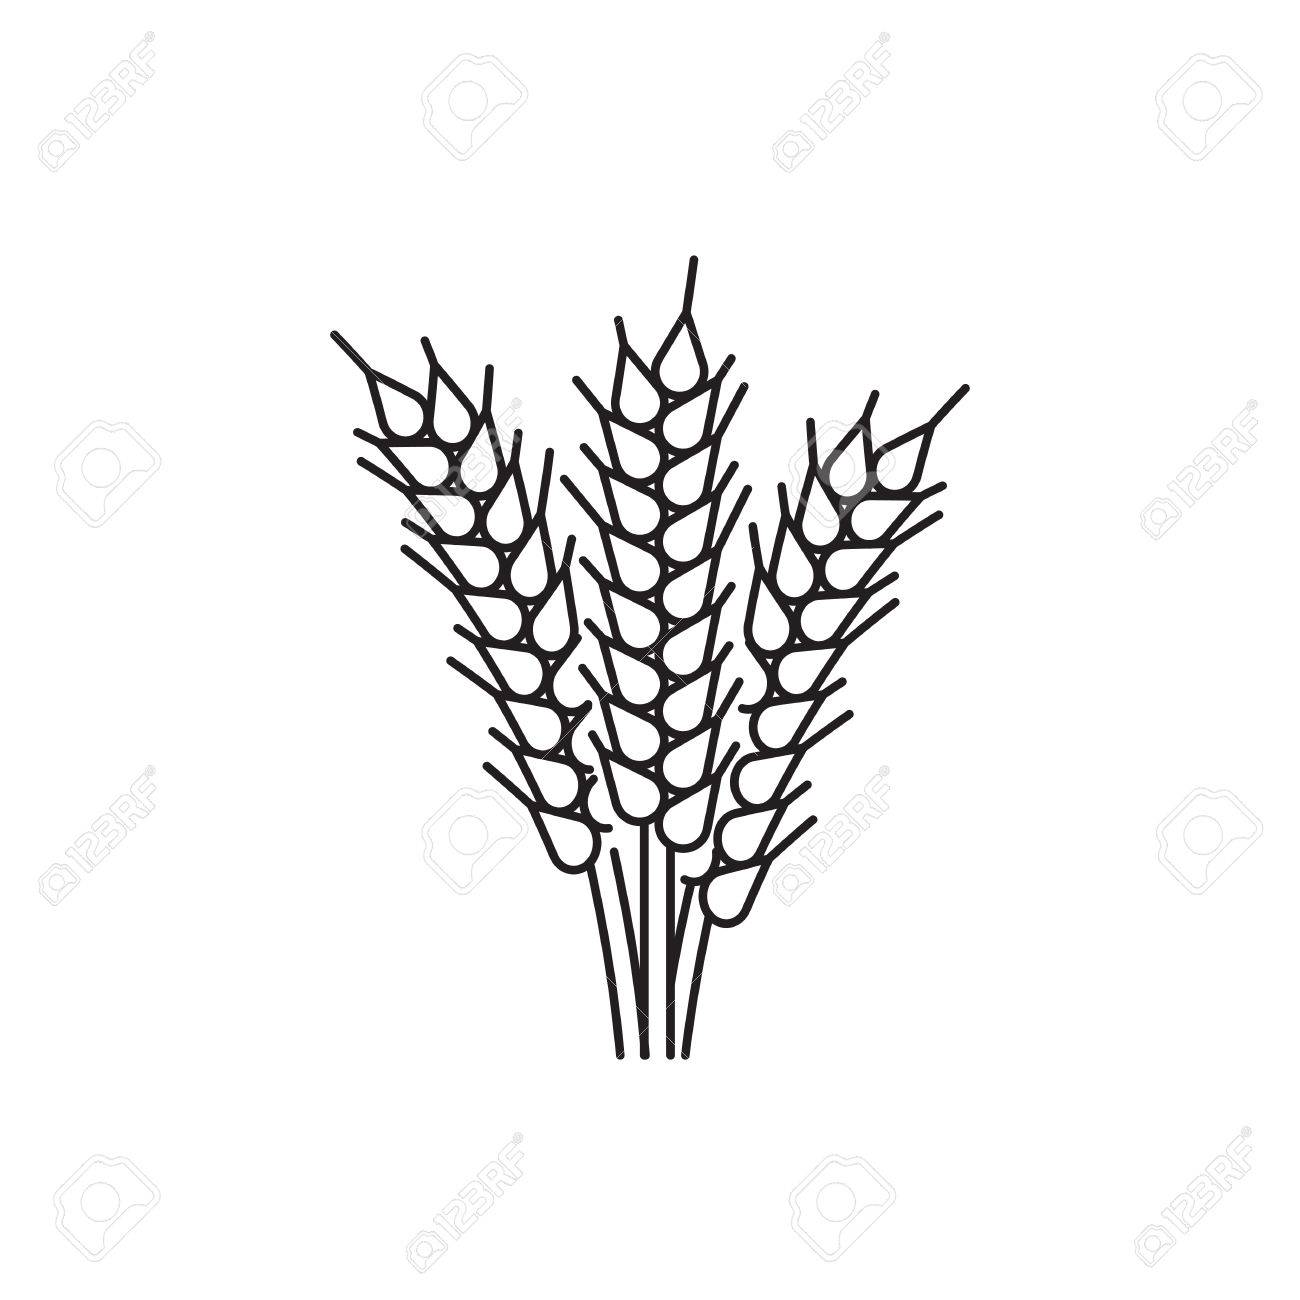 Free Wheat Clipart outline, Download Free Clip Art on Owips